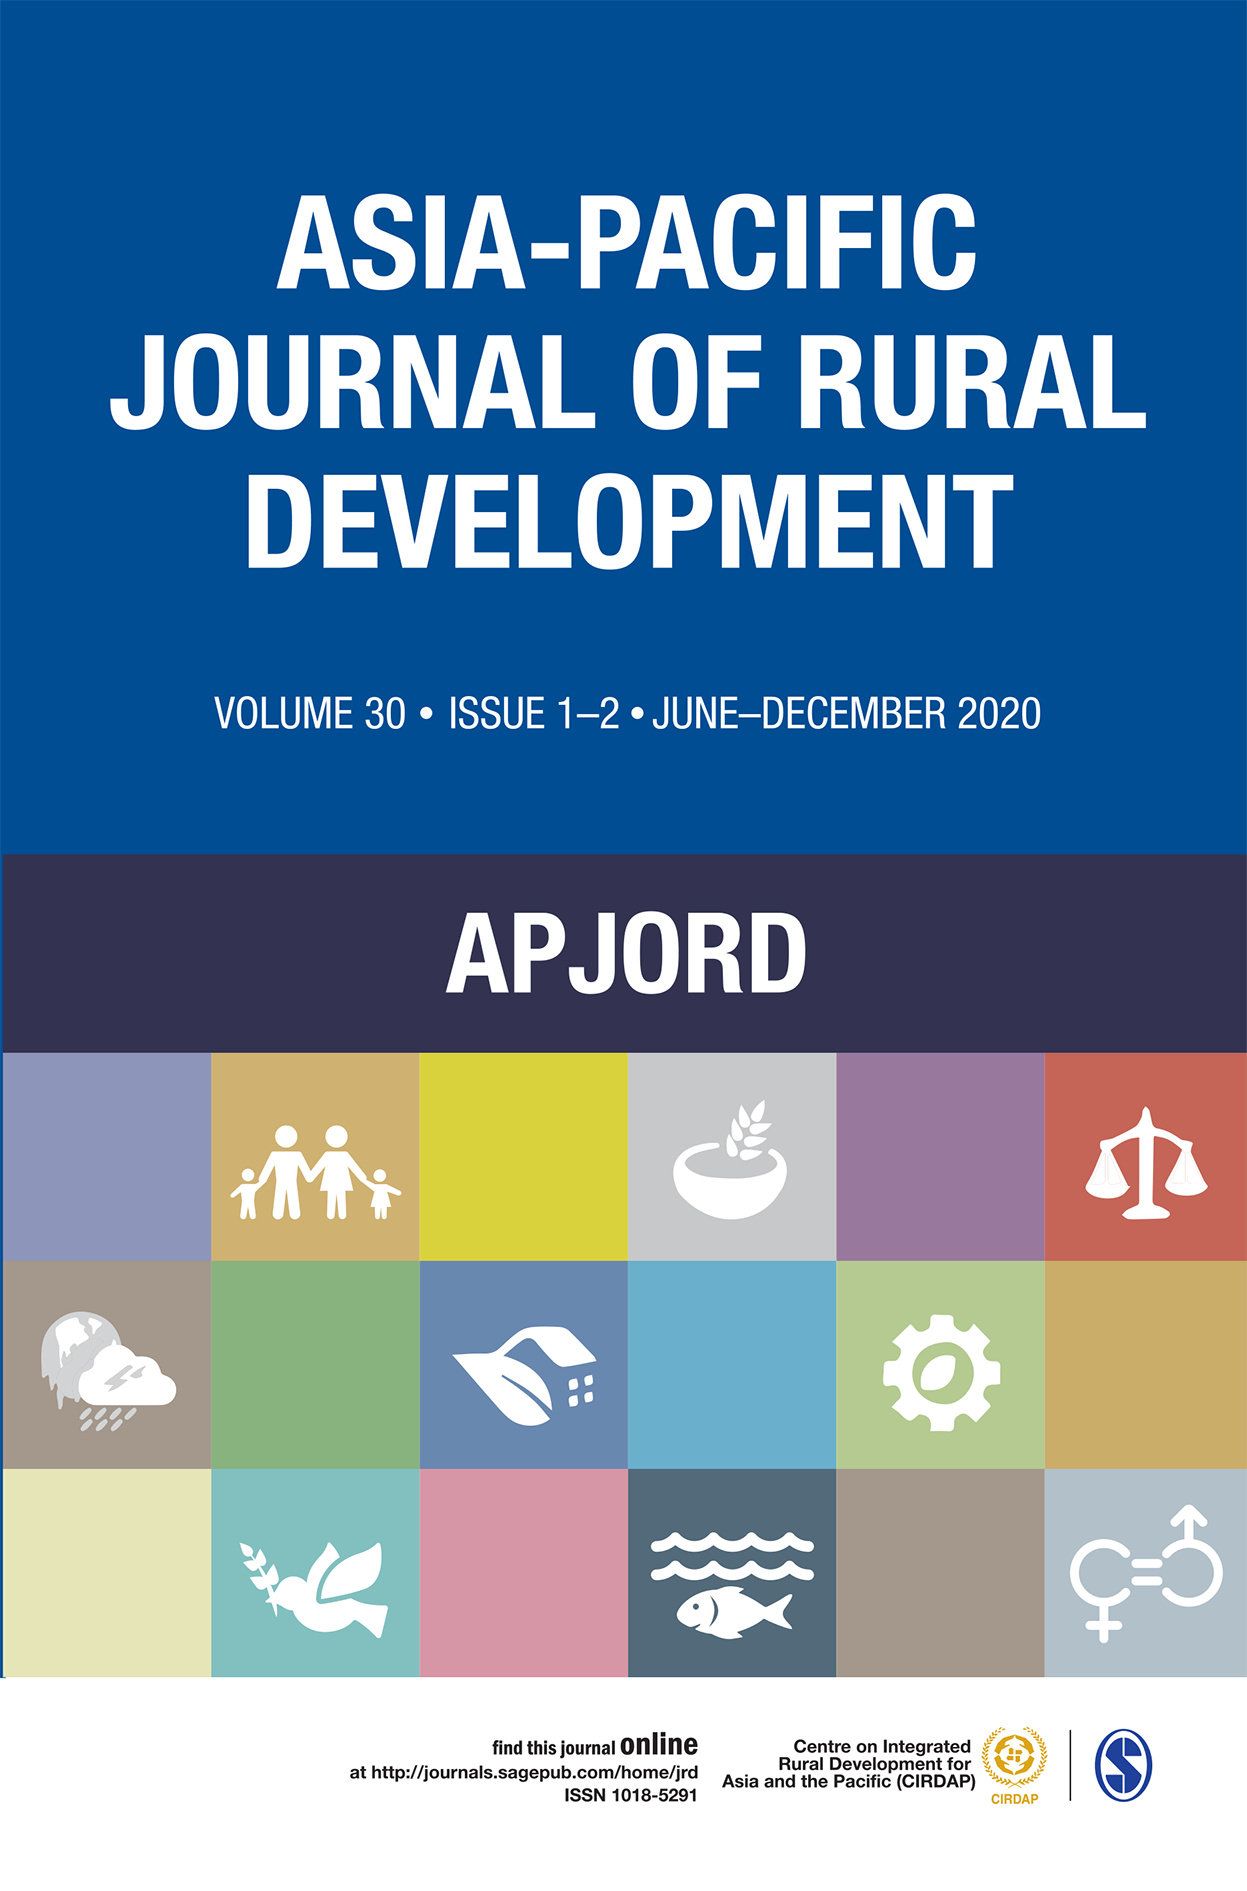 Asia-Pacific Journal of Rural Development